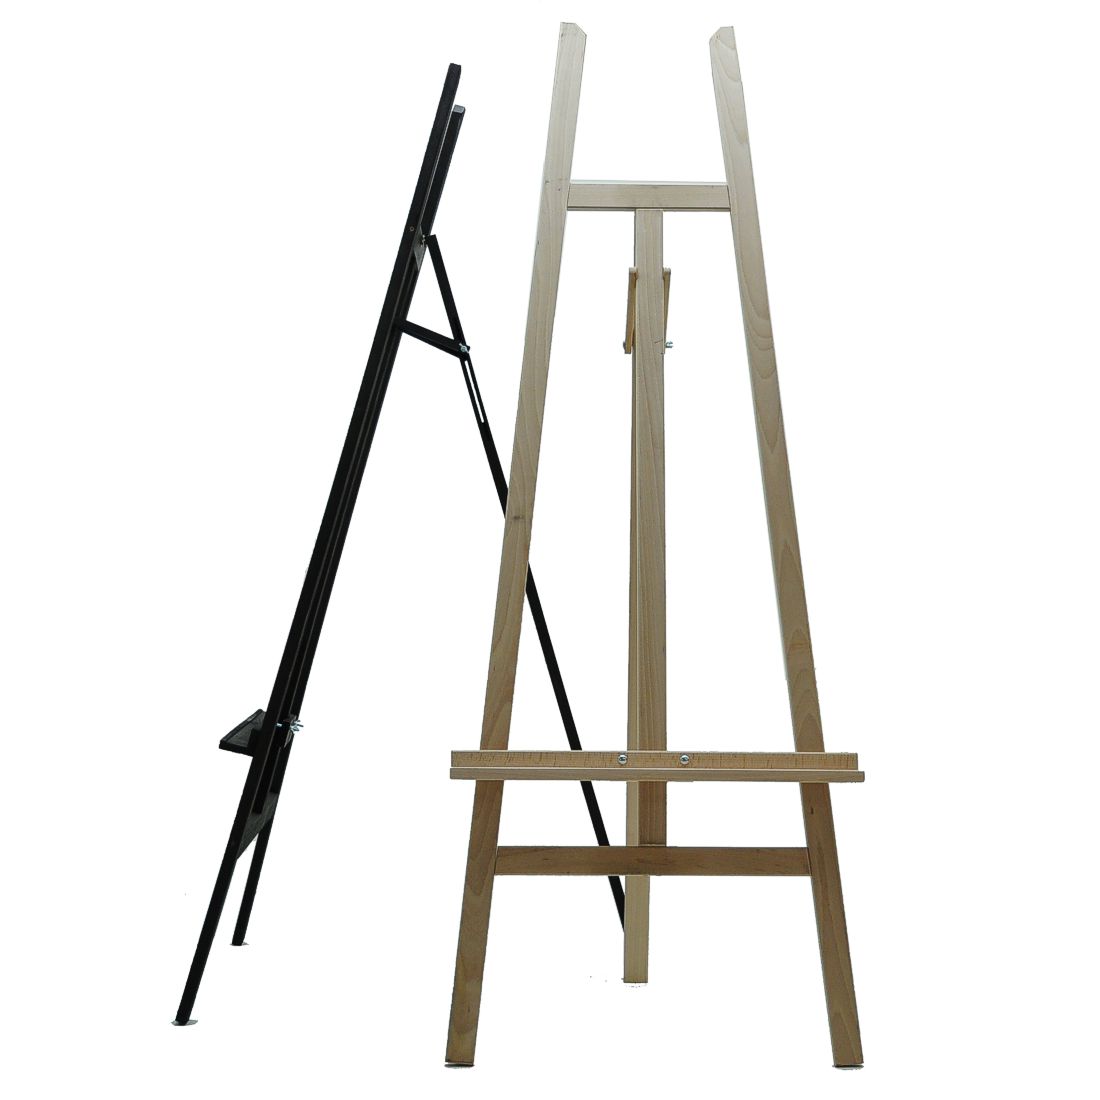 Easel display stands